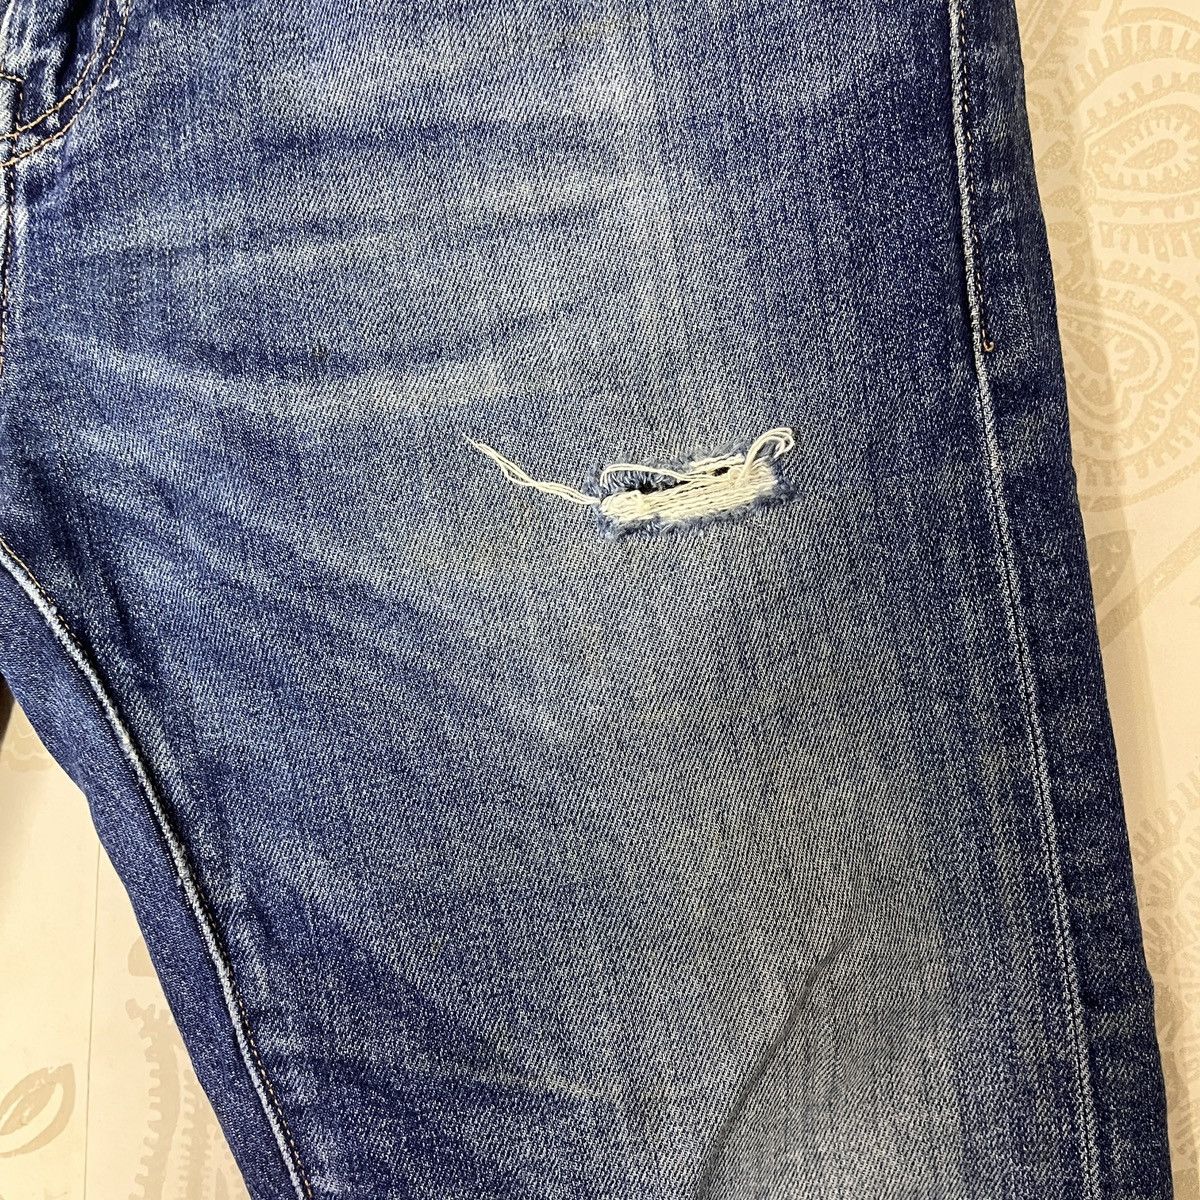 Levis Made & Crafted Blue Label Distressed Denim Jeans - 15